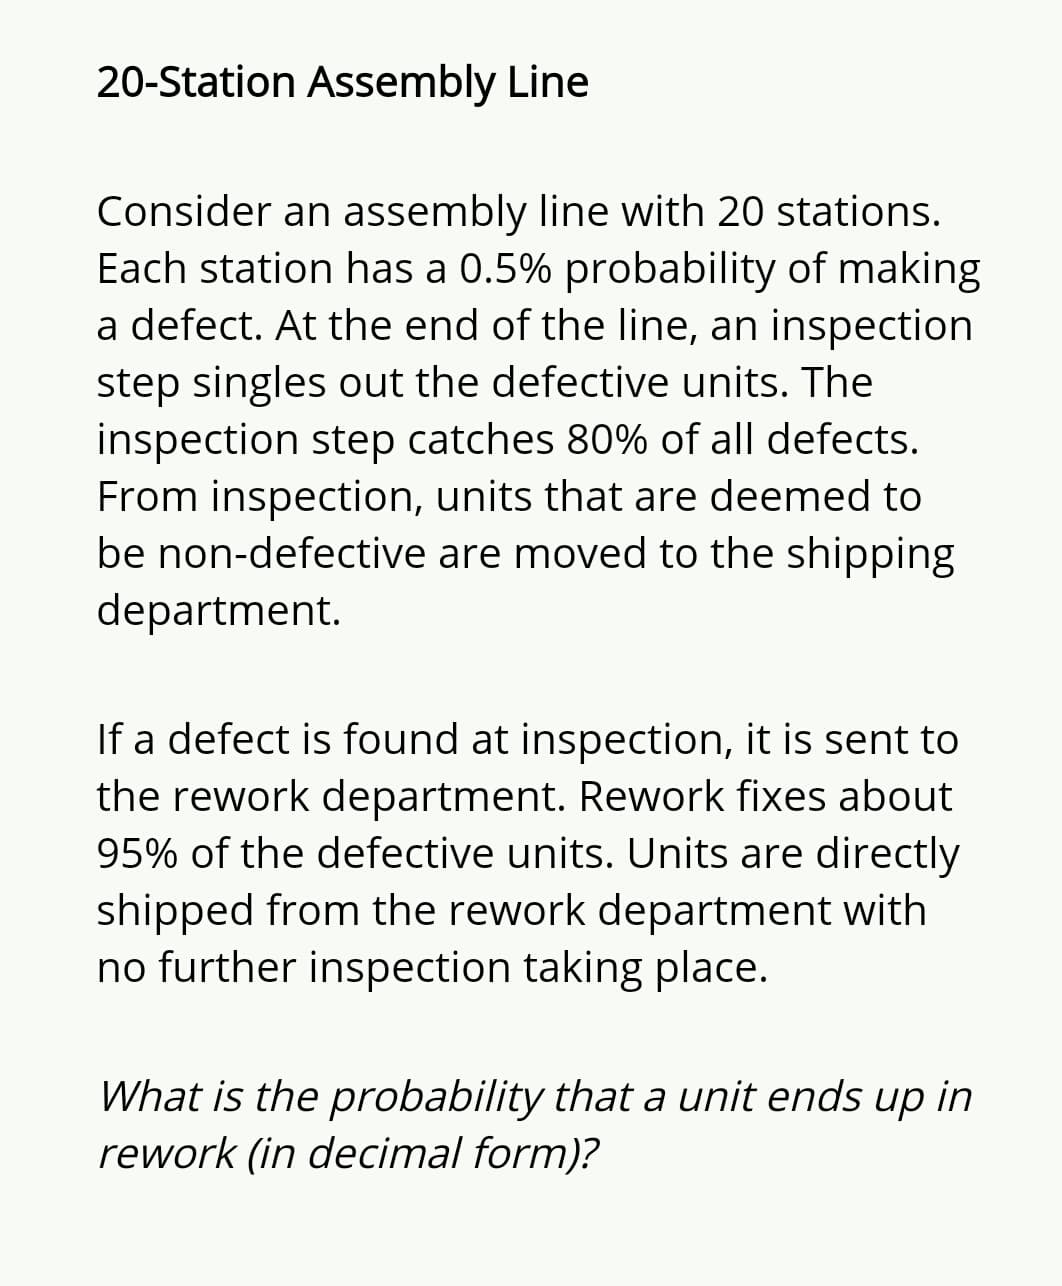 20-Station Assembly Line
Consider an assembly line with 20 stations.
Each station has a 0.5% probability of making
a defect. At the end of the line, an inspection
step singles out the defective units. The
inspection step catches 80% of all defects.
From inspection, units that are deemed to
be non-defective are moved to the shipping
department.
If a defect is found at inspection, it is sent to
the rework department. Rework fixes about
95% of the defective units. Units are directly
shipped from the rework department with
no further inspection taking place.
What is the probability that a unit ends up in
rework (in decimal form)?
